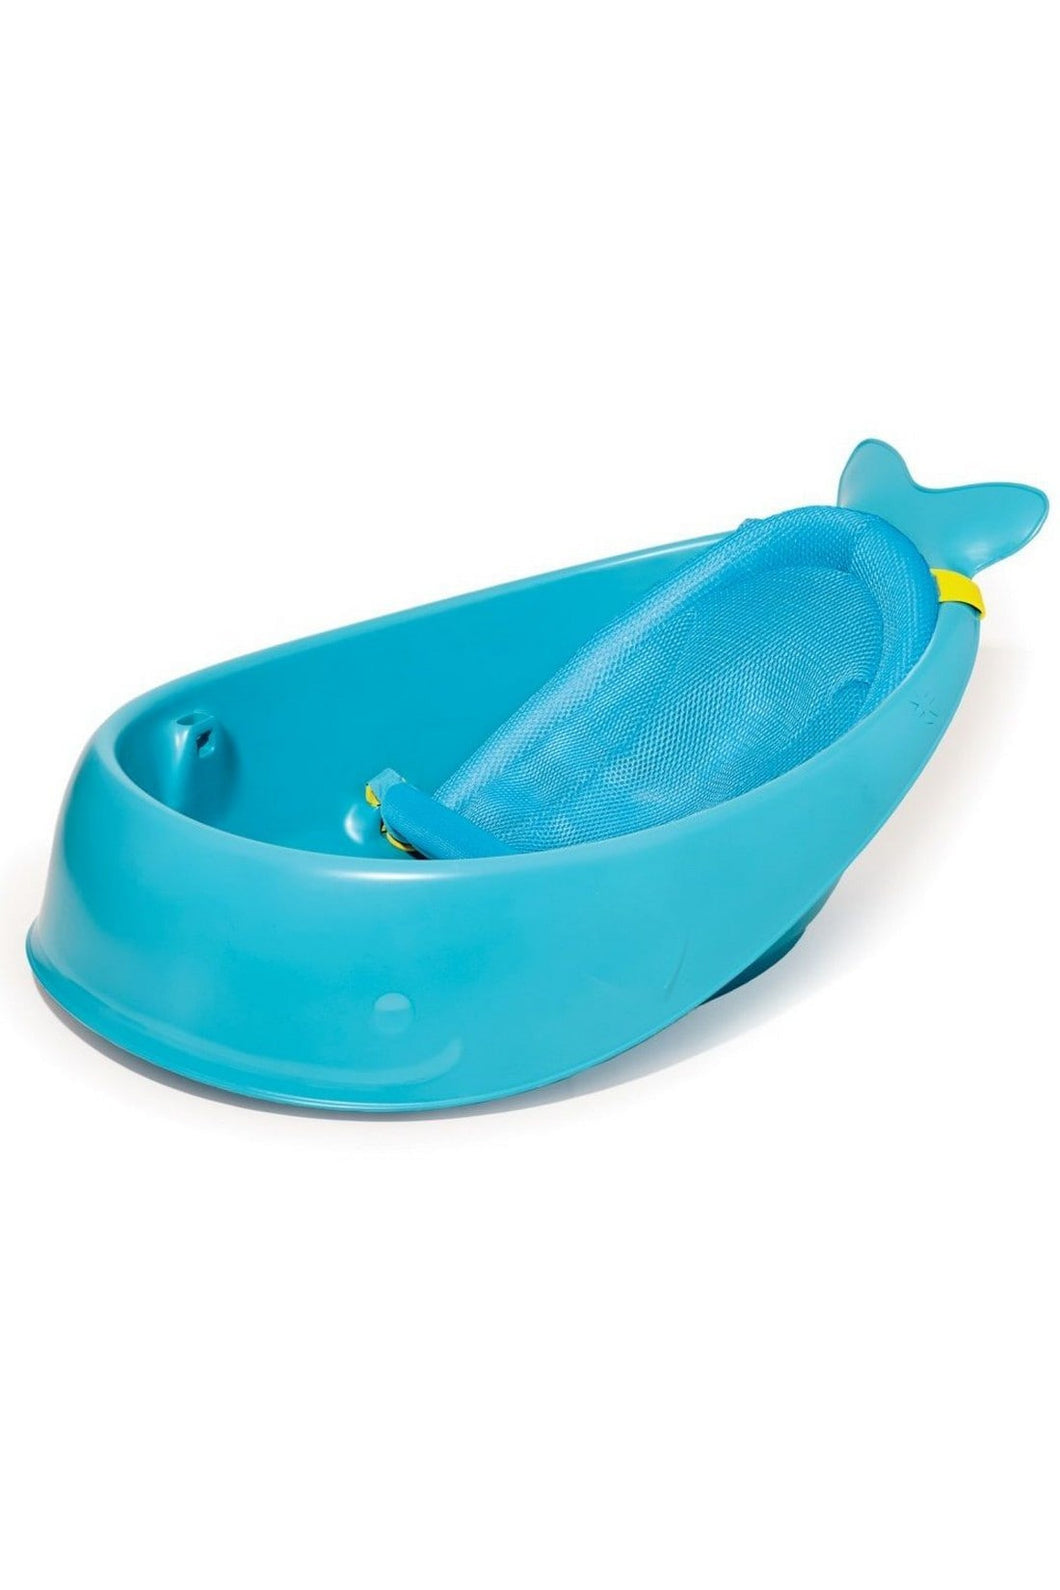 Skip Hop Moby Smart Sling 3 Stage Baby Tub 1